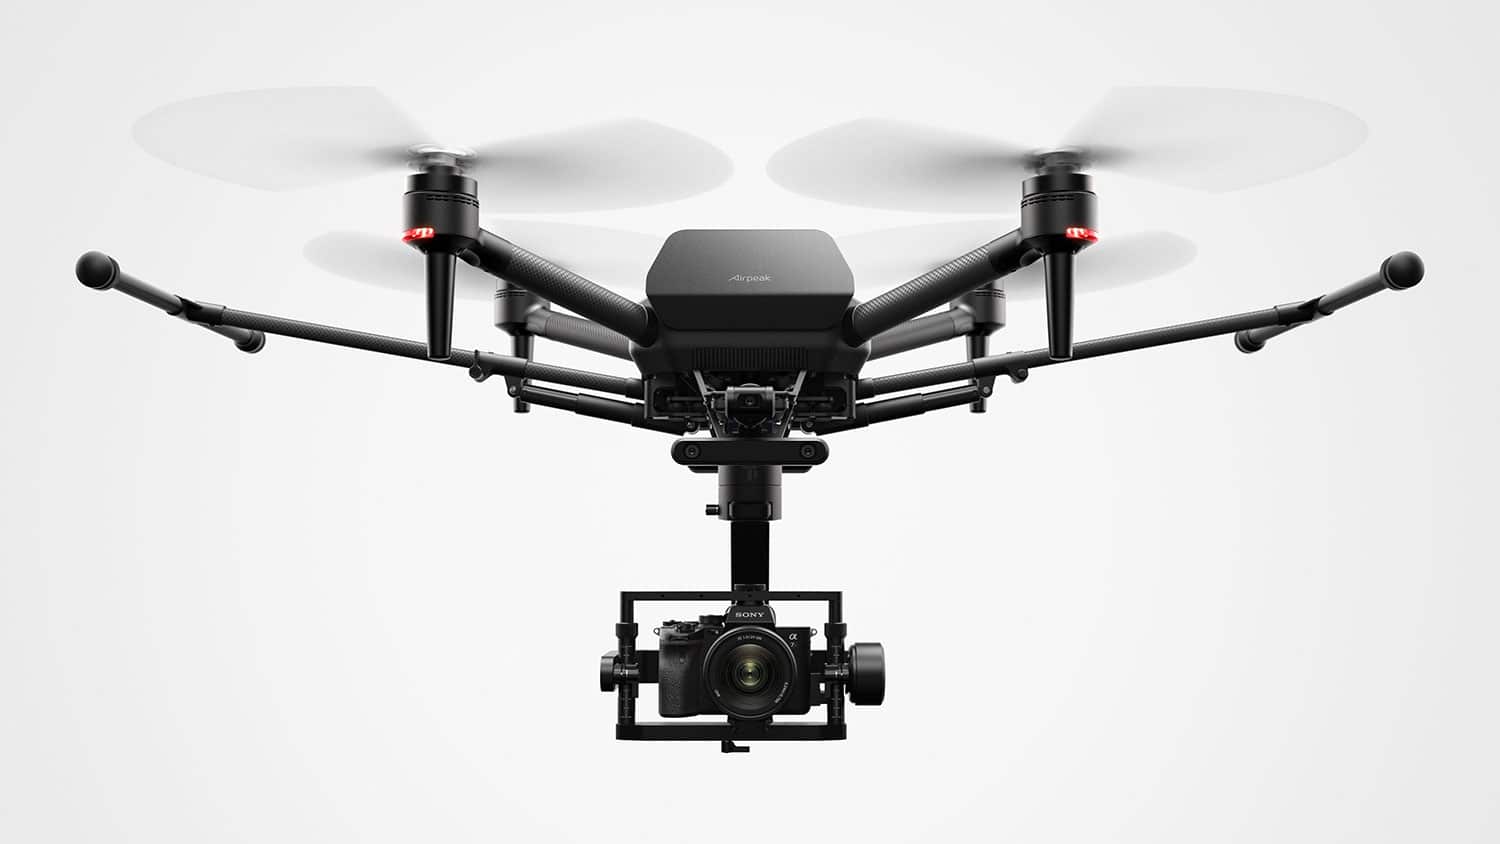 Sony Airpeak drone announced with support for full frame cameras.